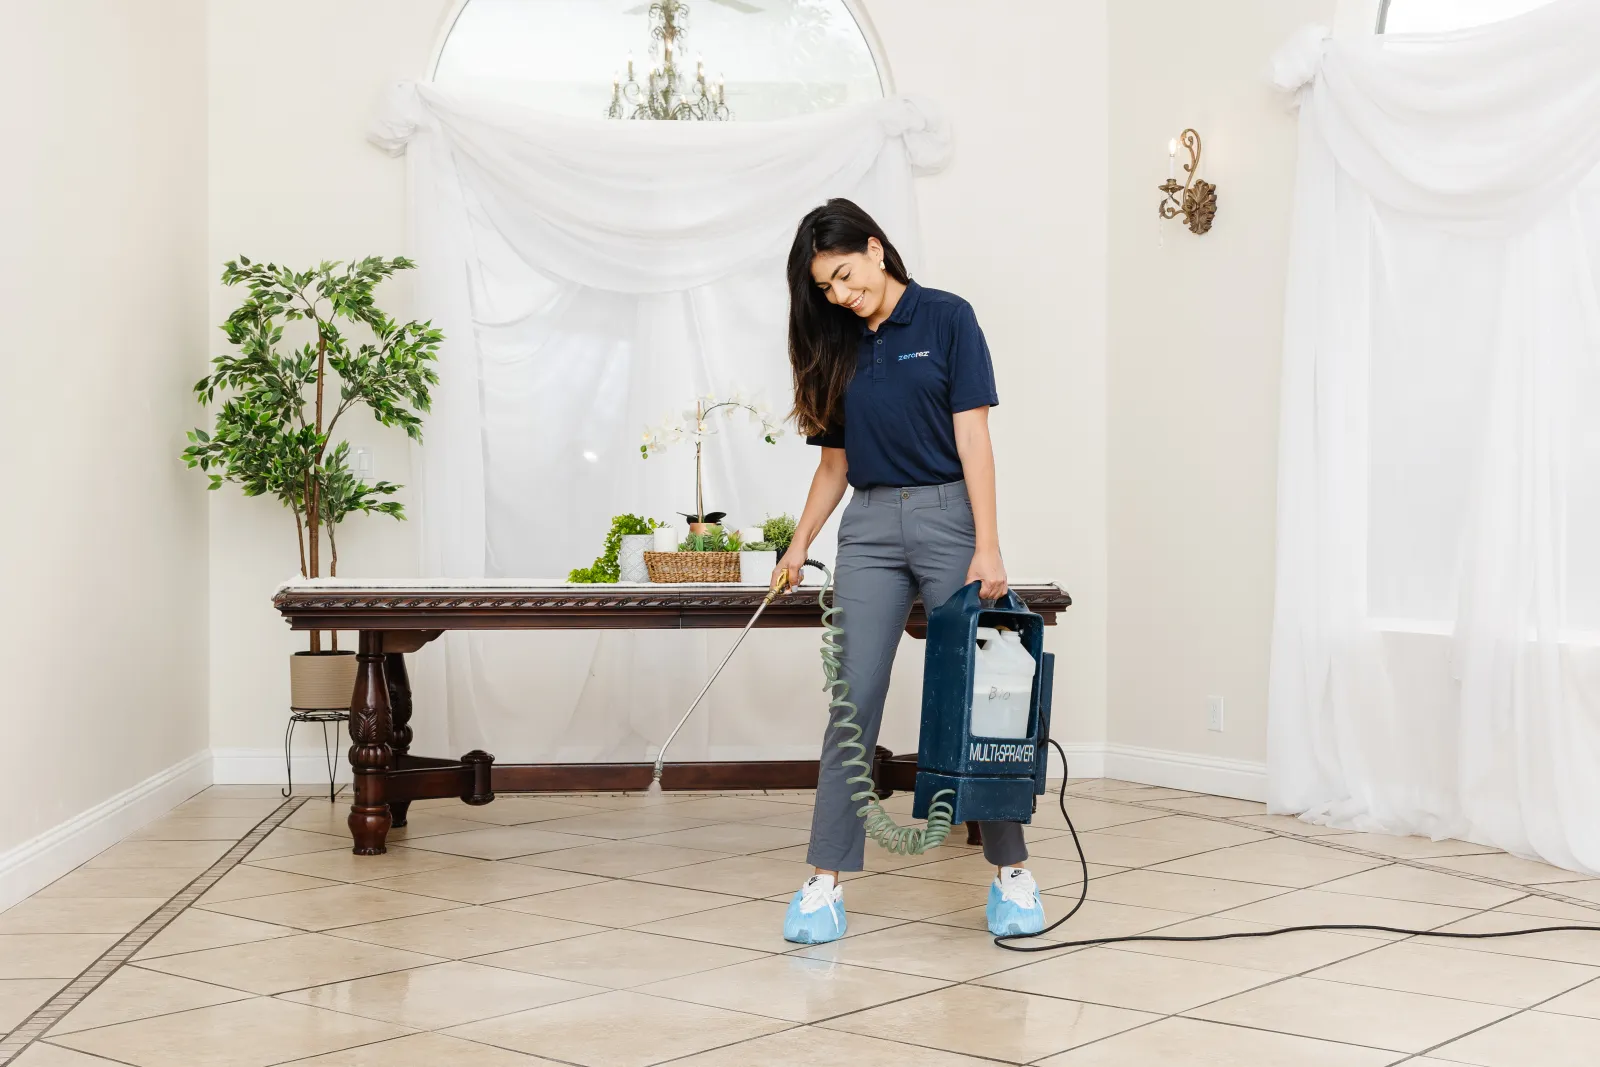 Female Zerorez® technician spraying a pretreatment to a porcelain tile floor in a dining room area before she cleans it with the best tile floor cleaning system which is Zerorez professional tile cleaning services